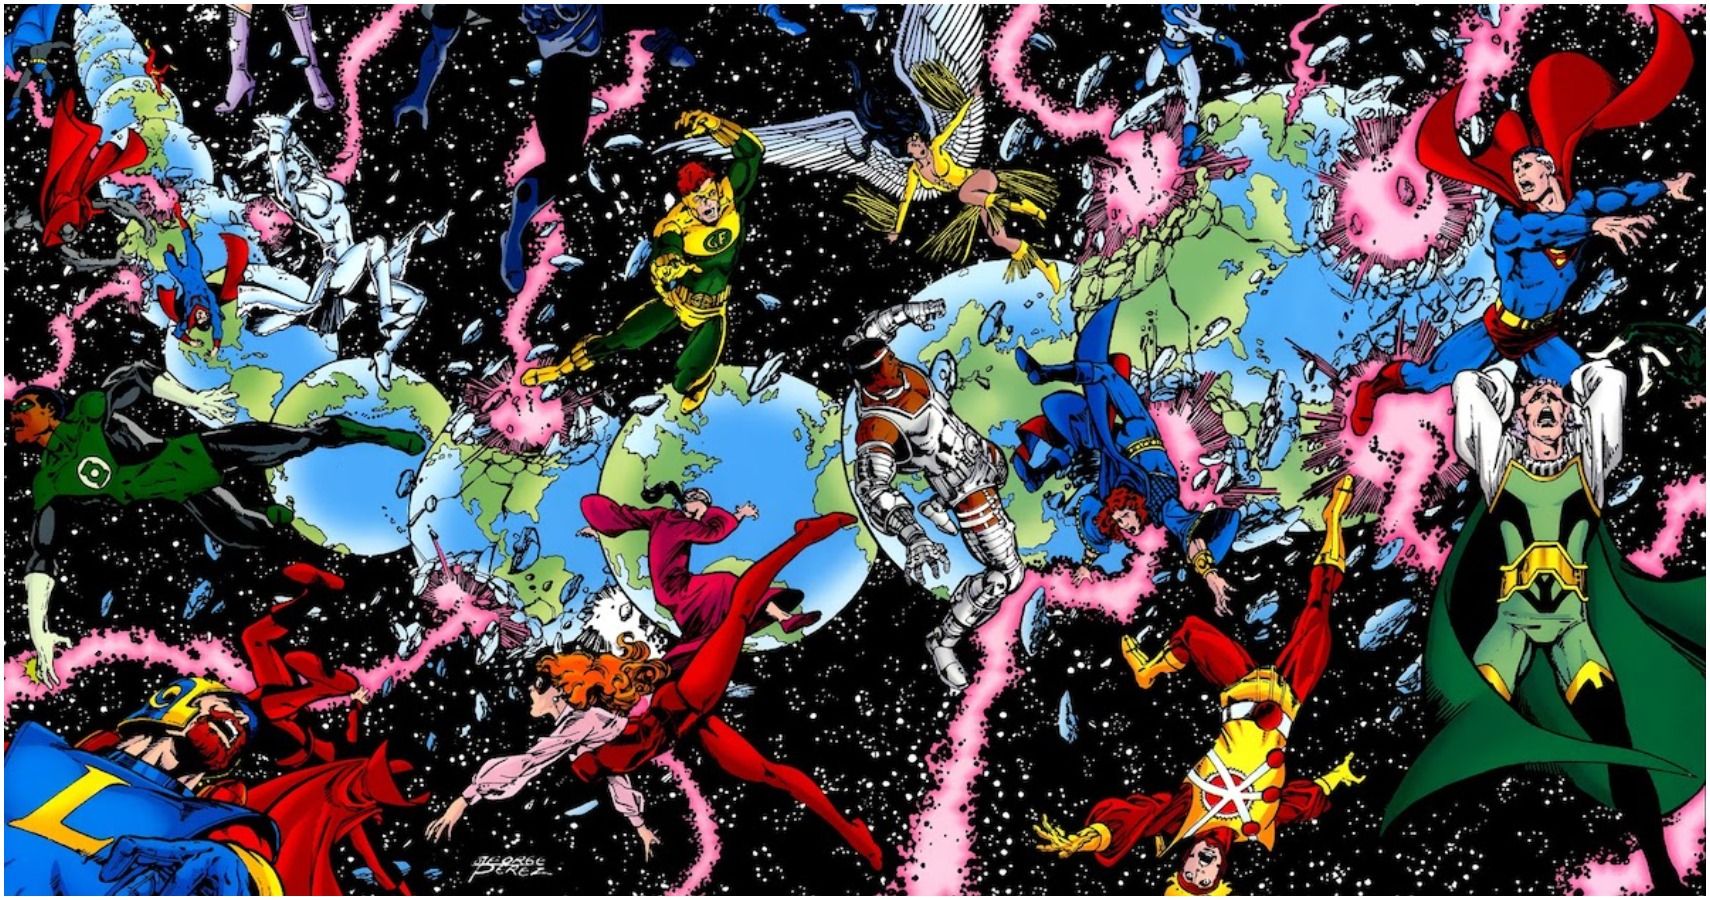 An image of heroes and villains clashing in space in DC's Crisis on Infinite Earths